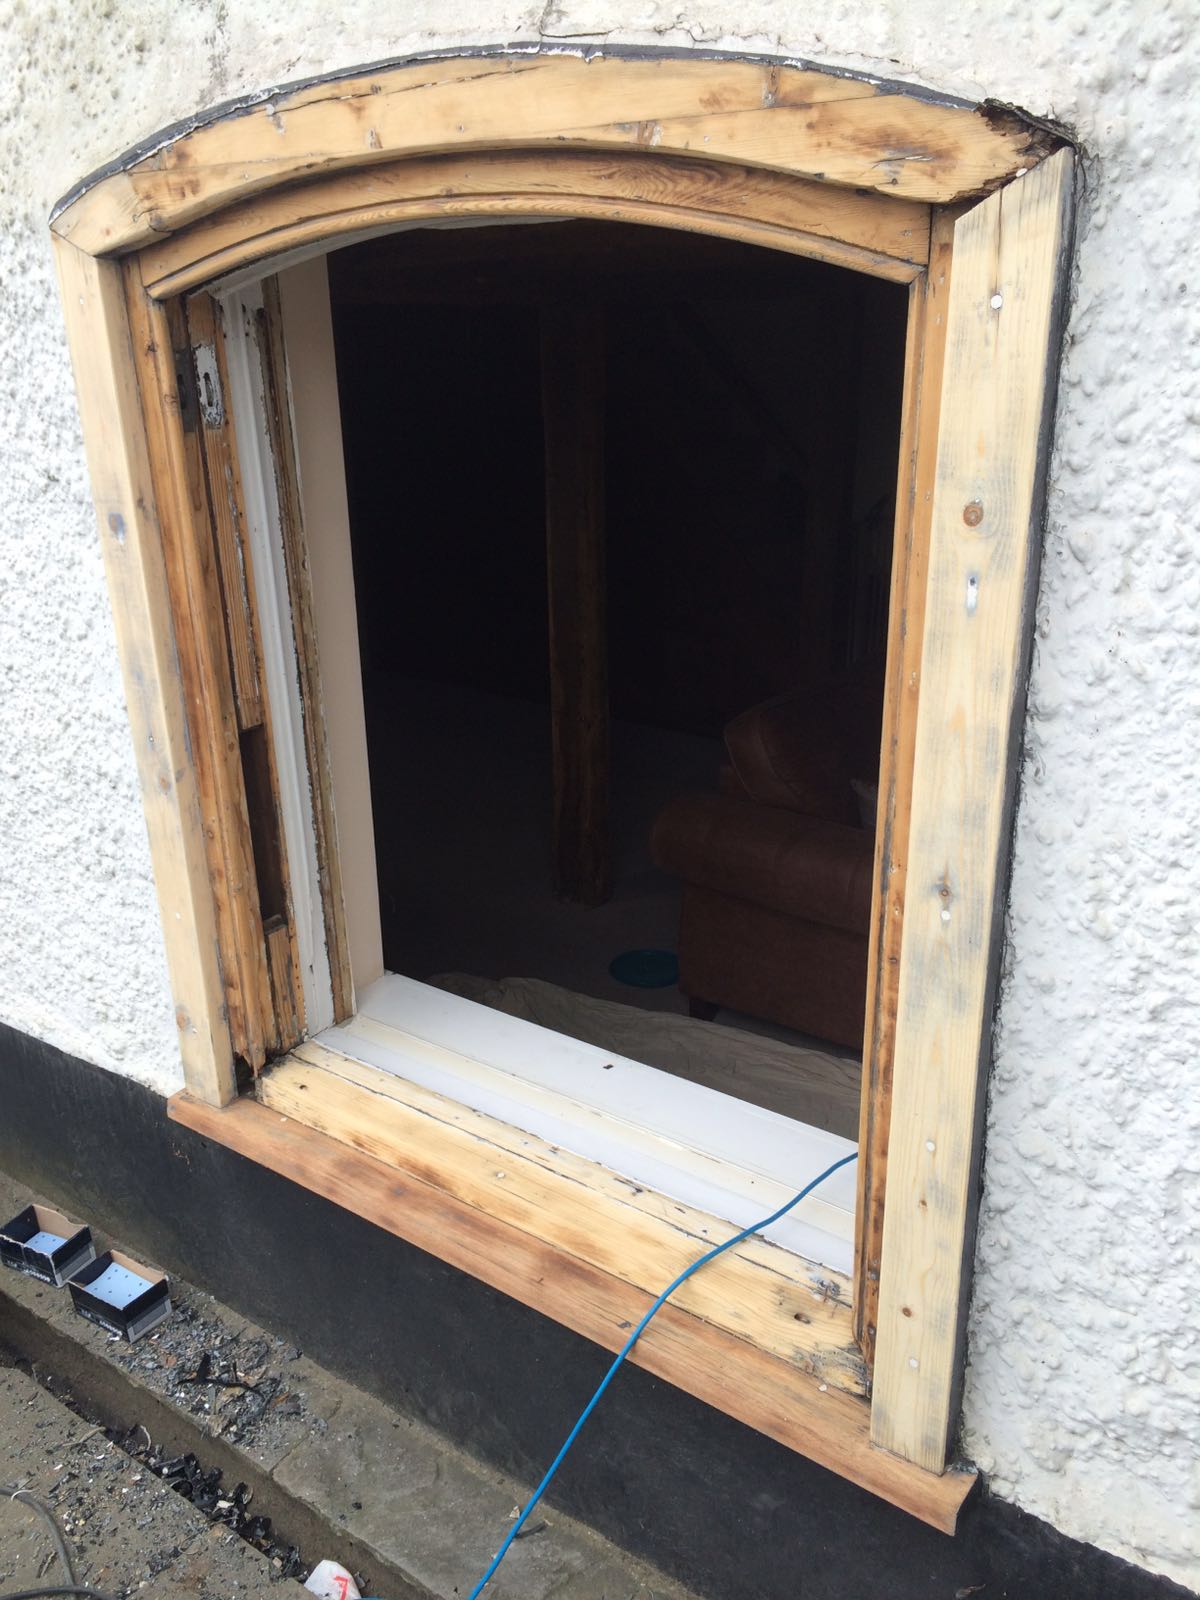 Timber window restored ready for painting and glazing